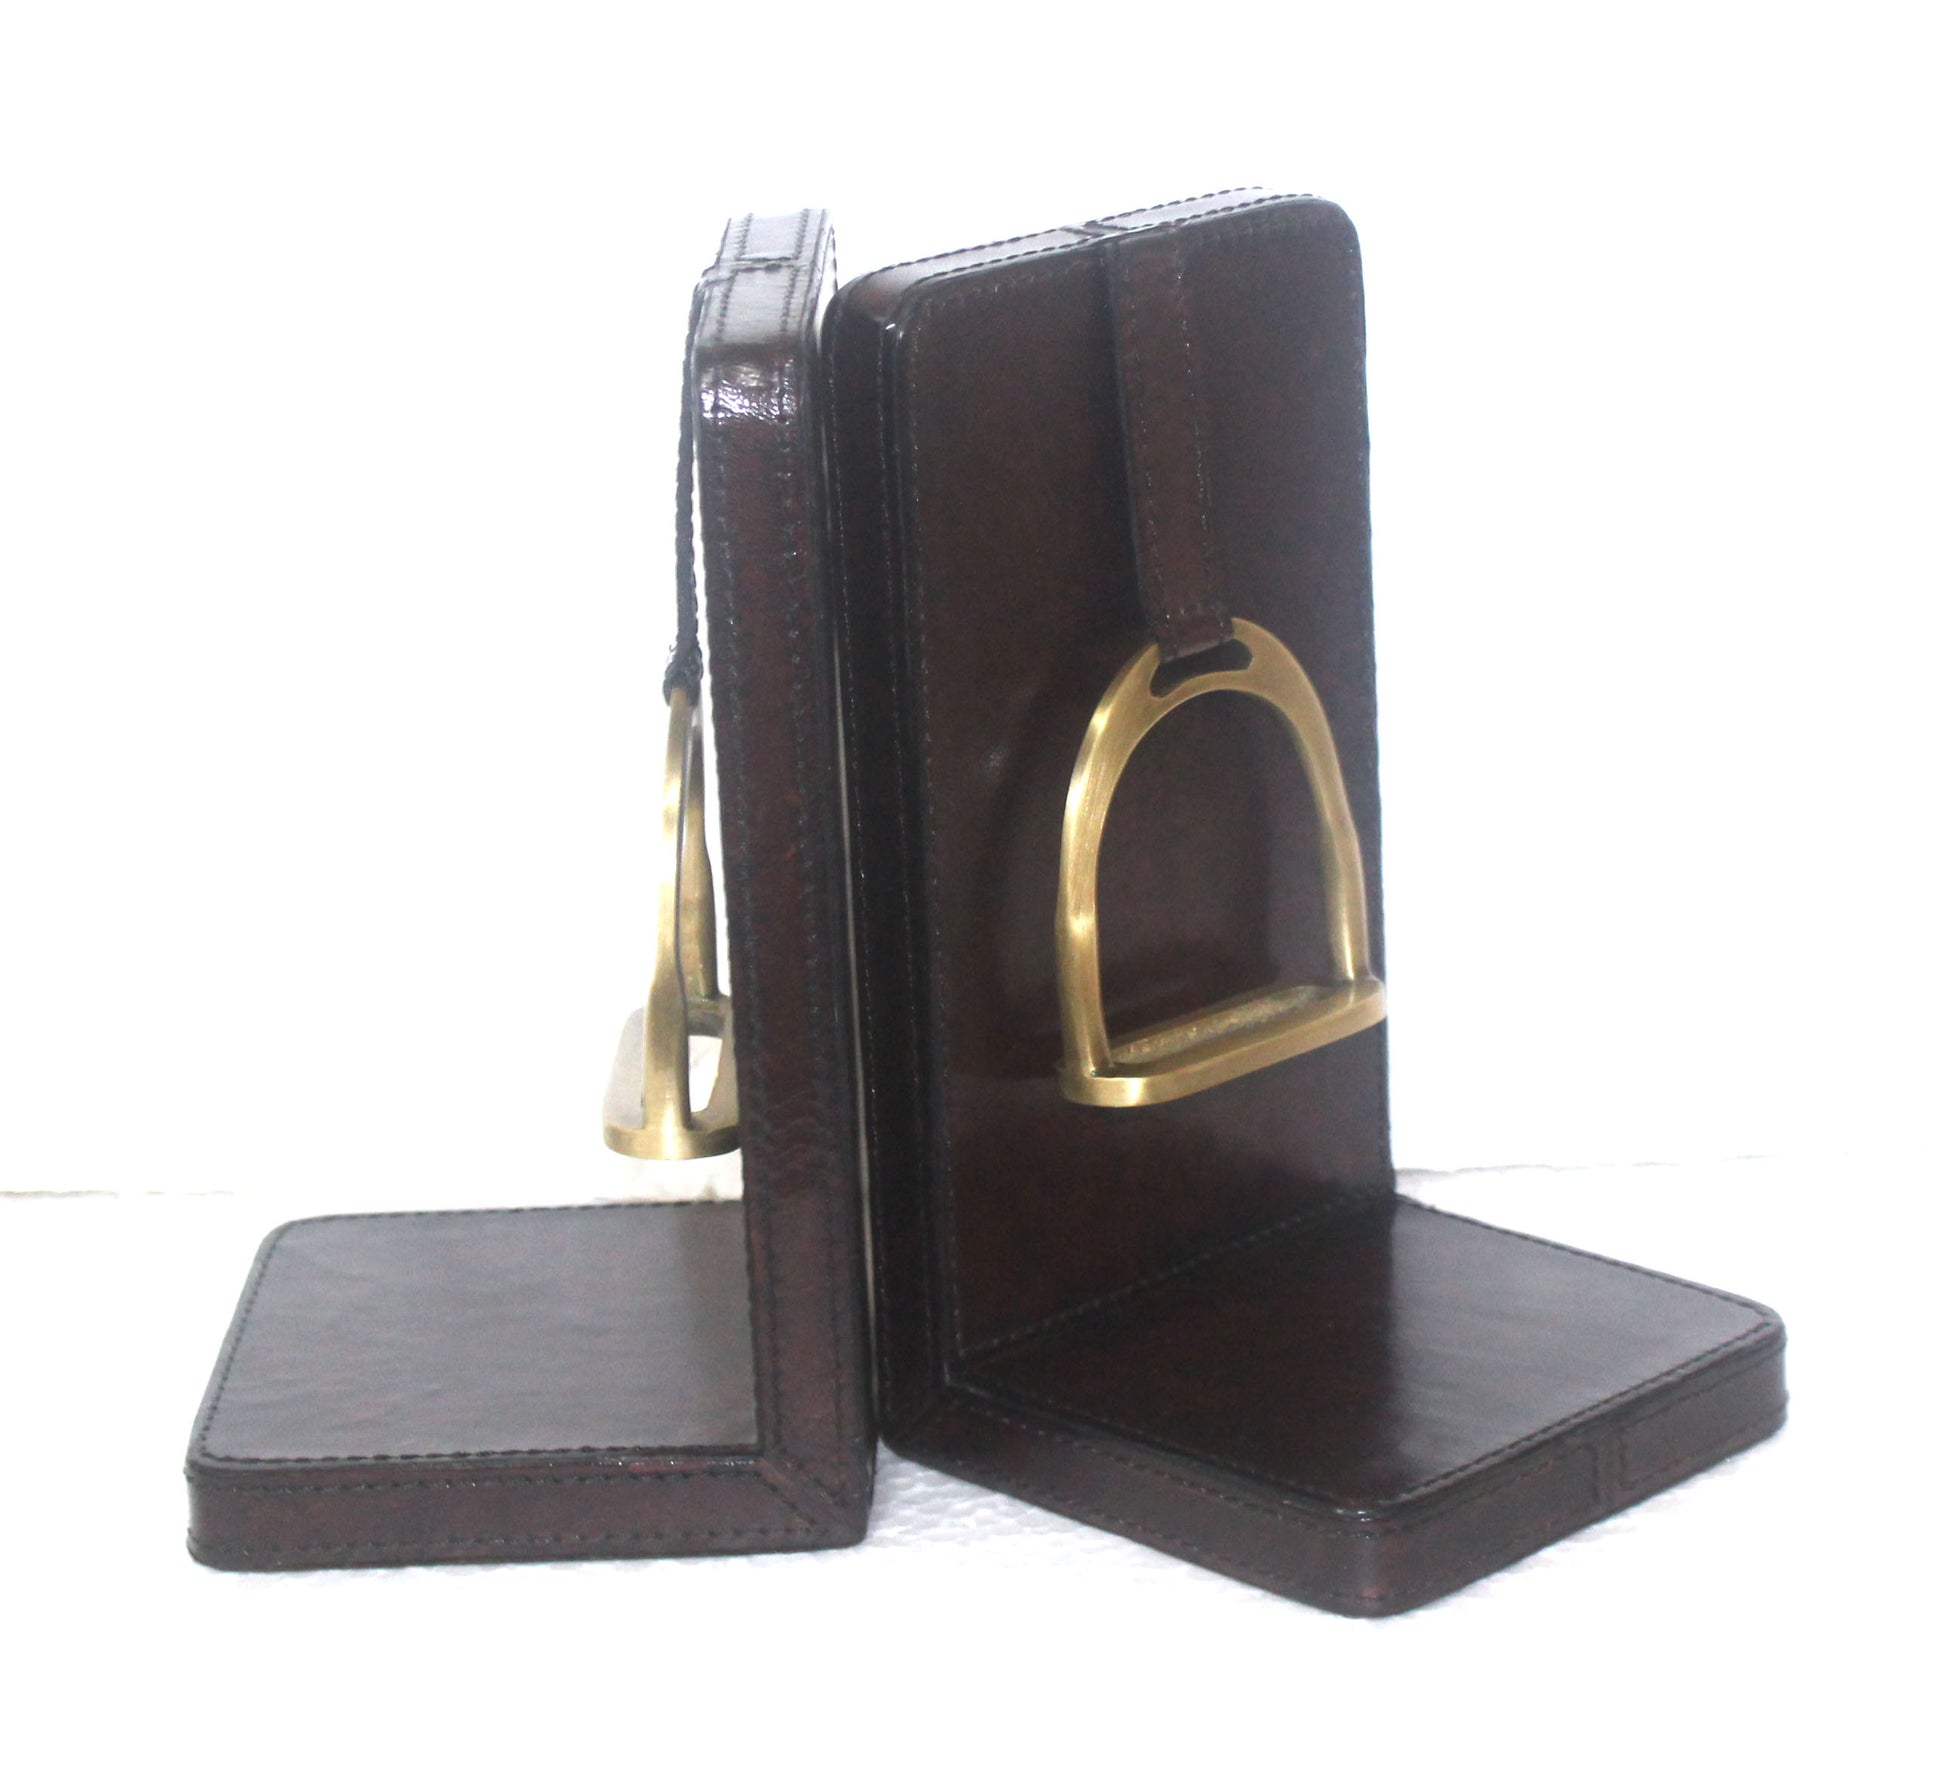 Leather Bookends with Stirrups - Dark Brown - DCOR